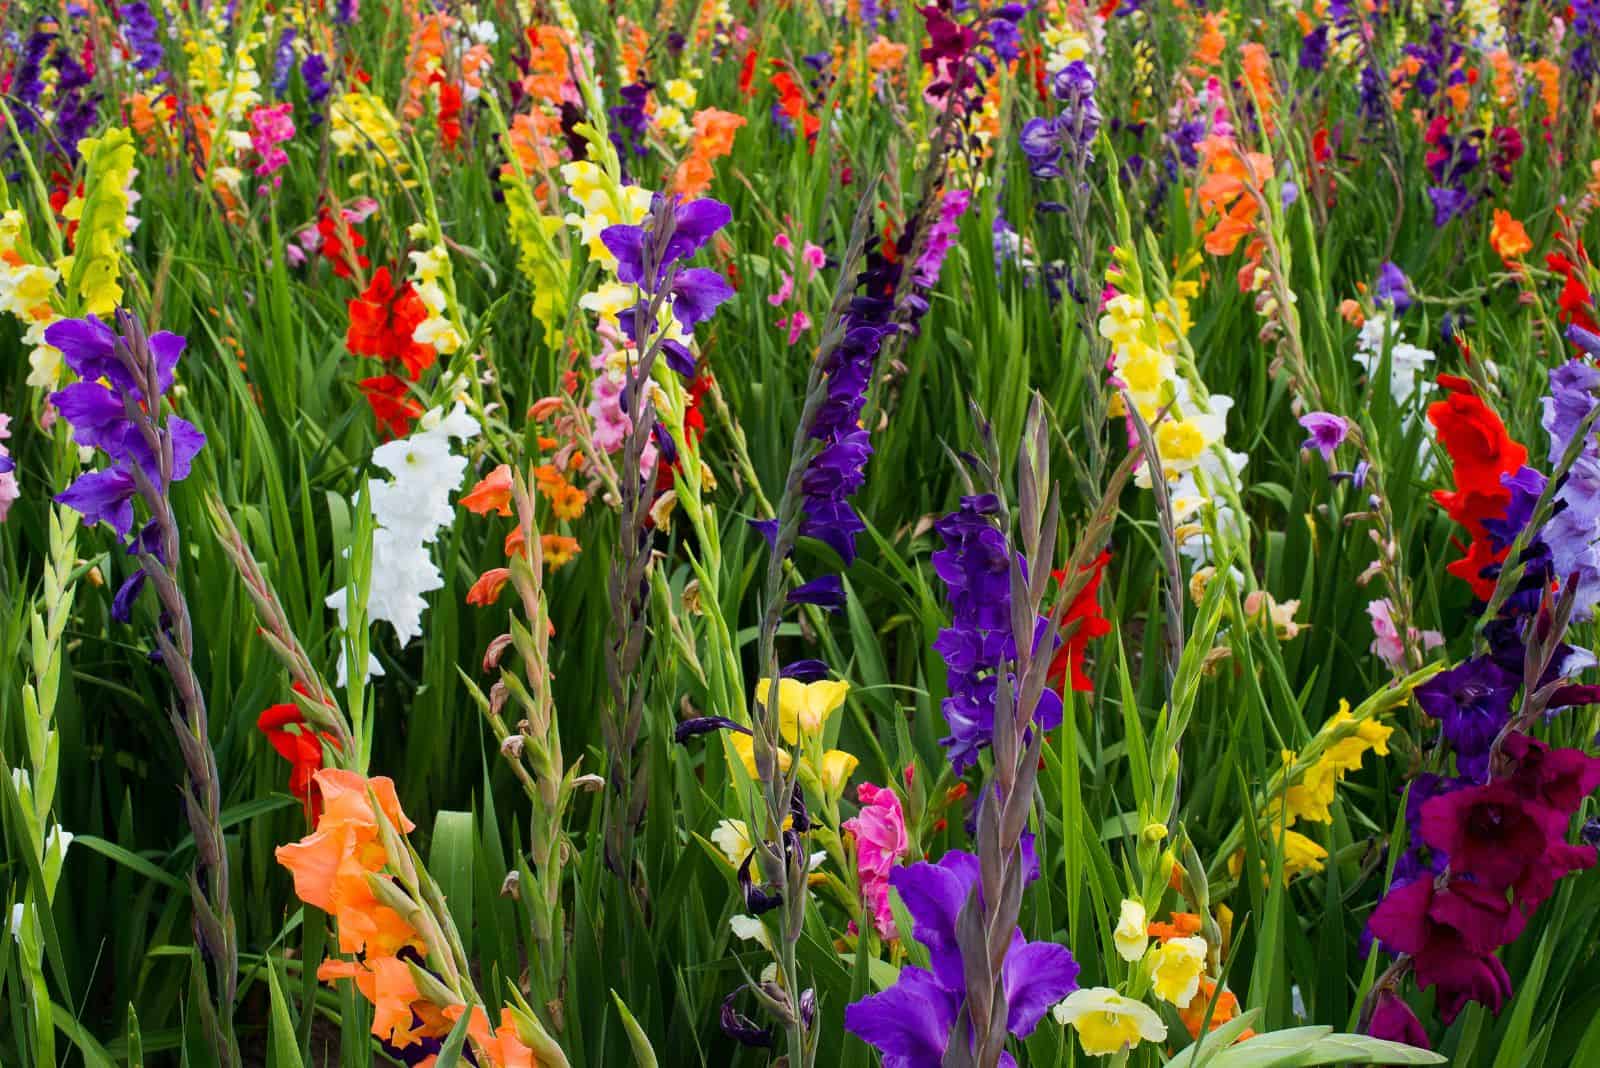 A Complete Guide Through The Gladiolus Growing Stages